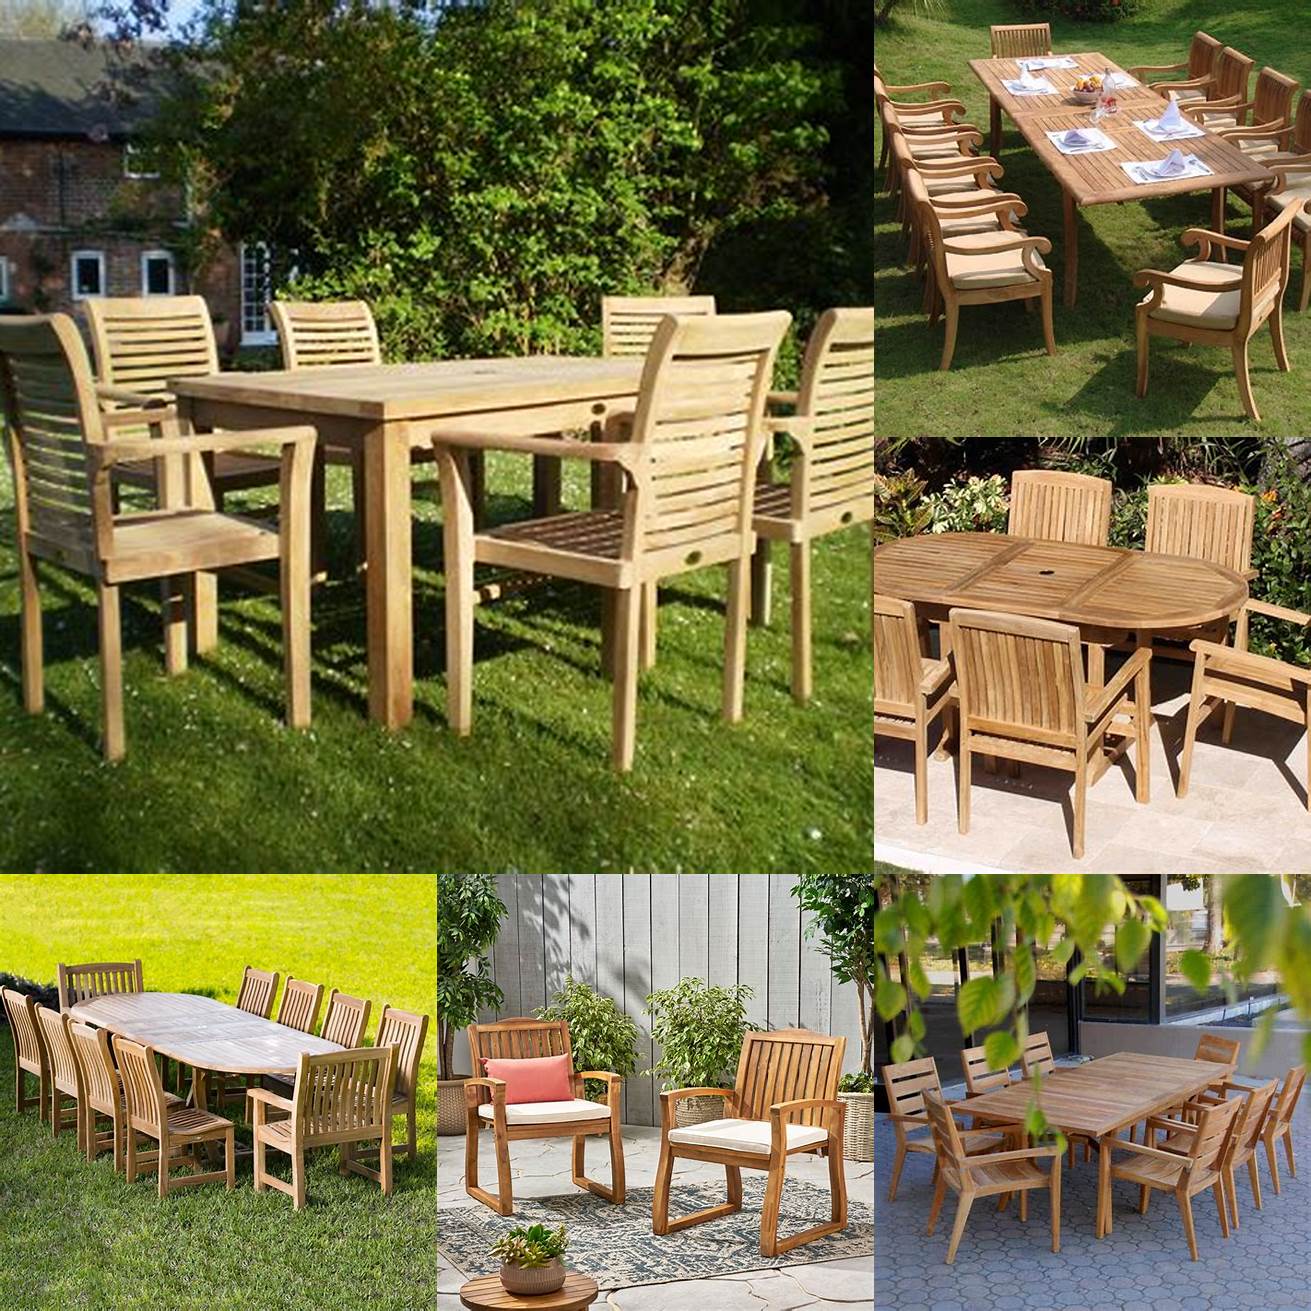 A picture of an outdoor set made of teak